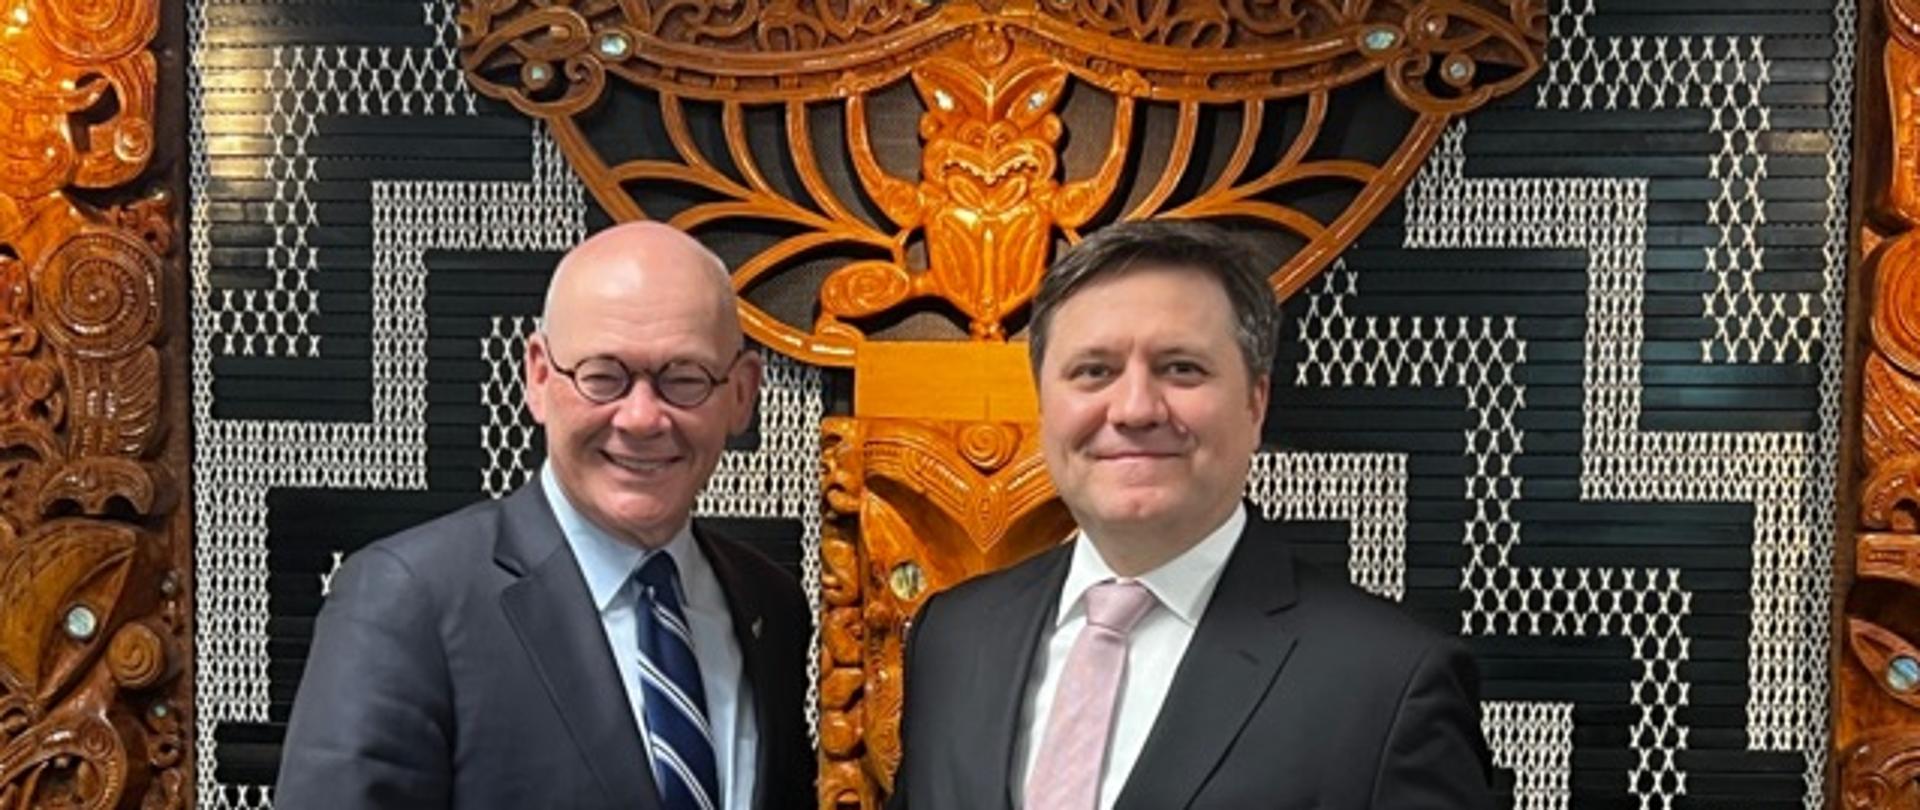 Deputy Minister Wojciech Gerwel during his visit to Australia, New Zealand and Papua New Guinea